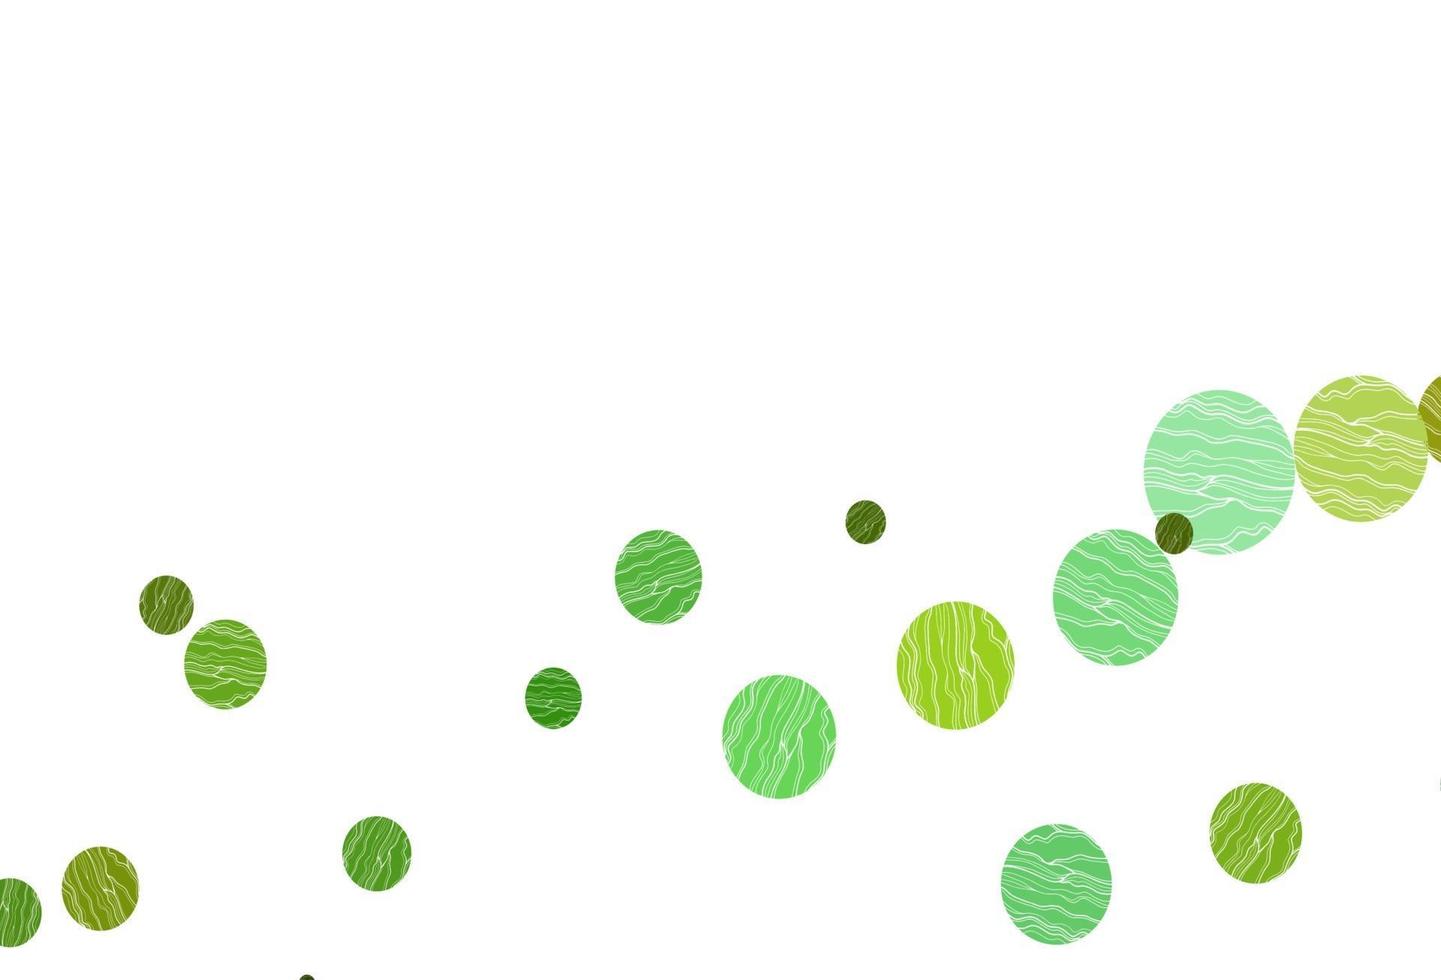 Light green, yellow vector cover with spots.